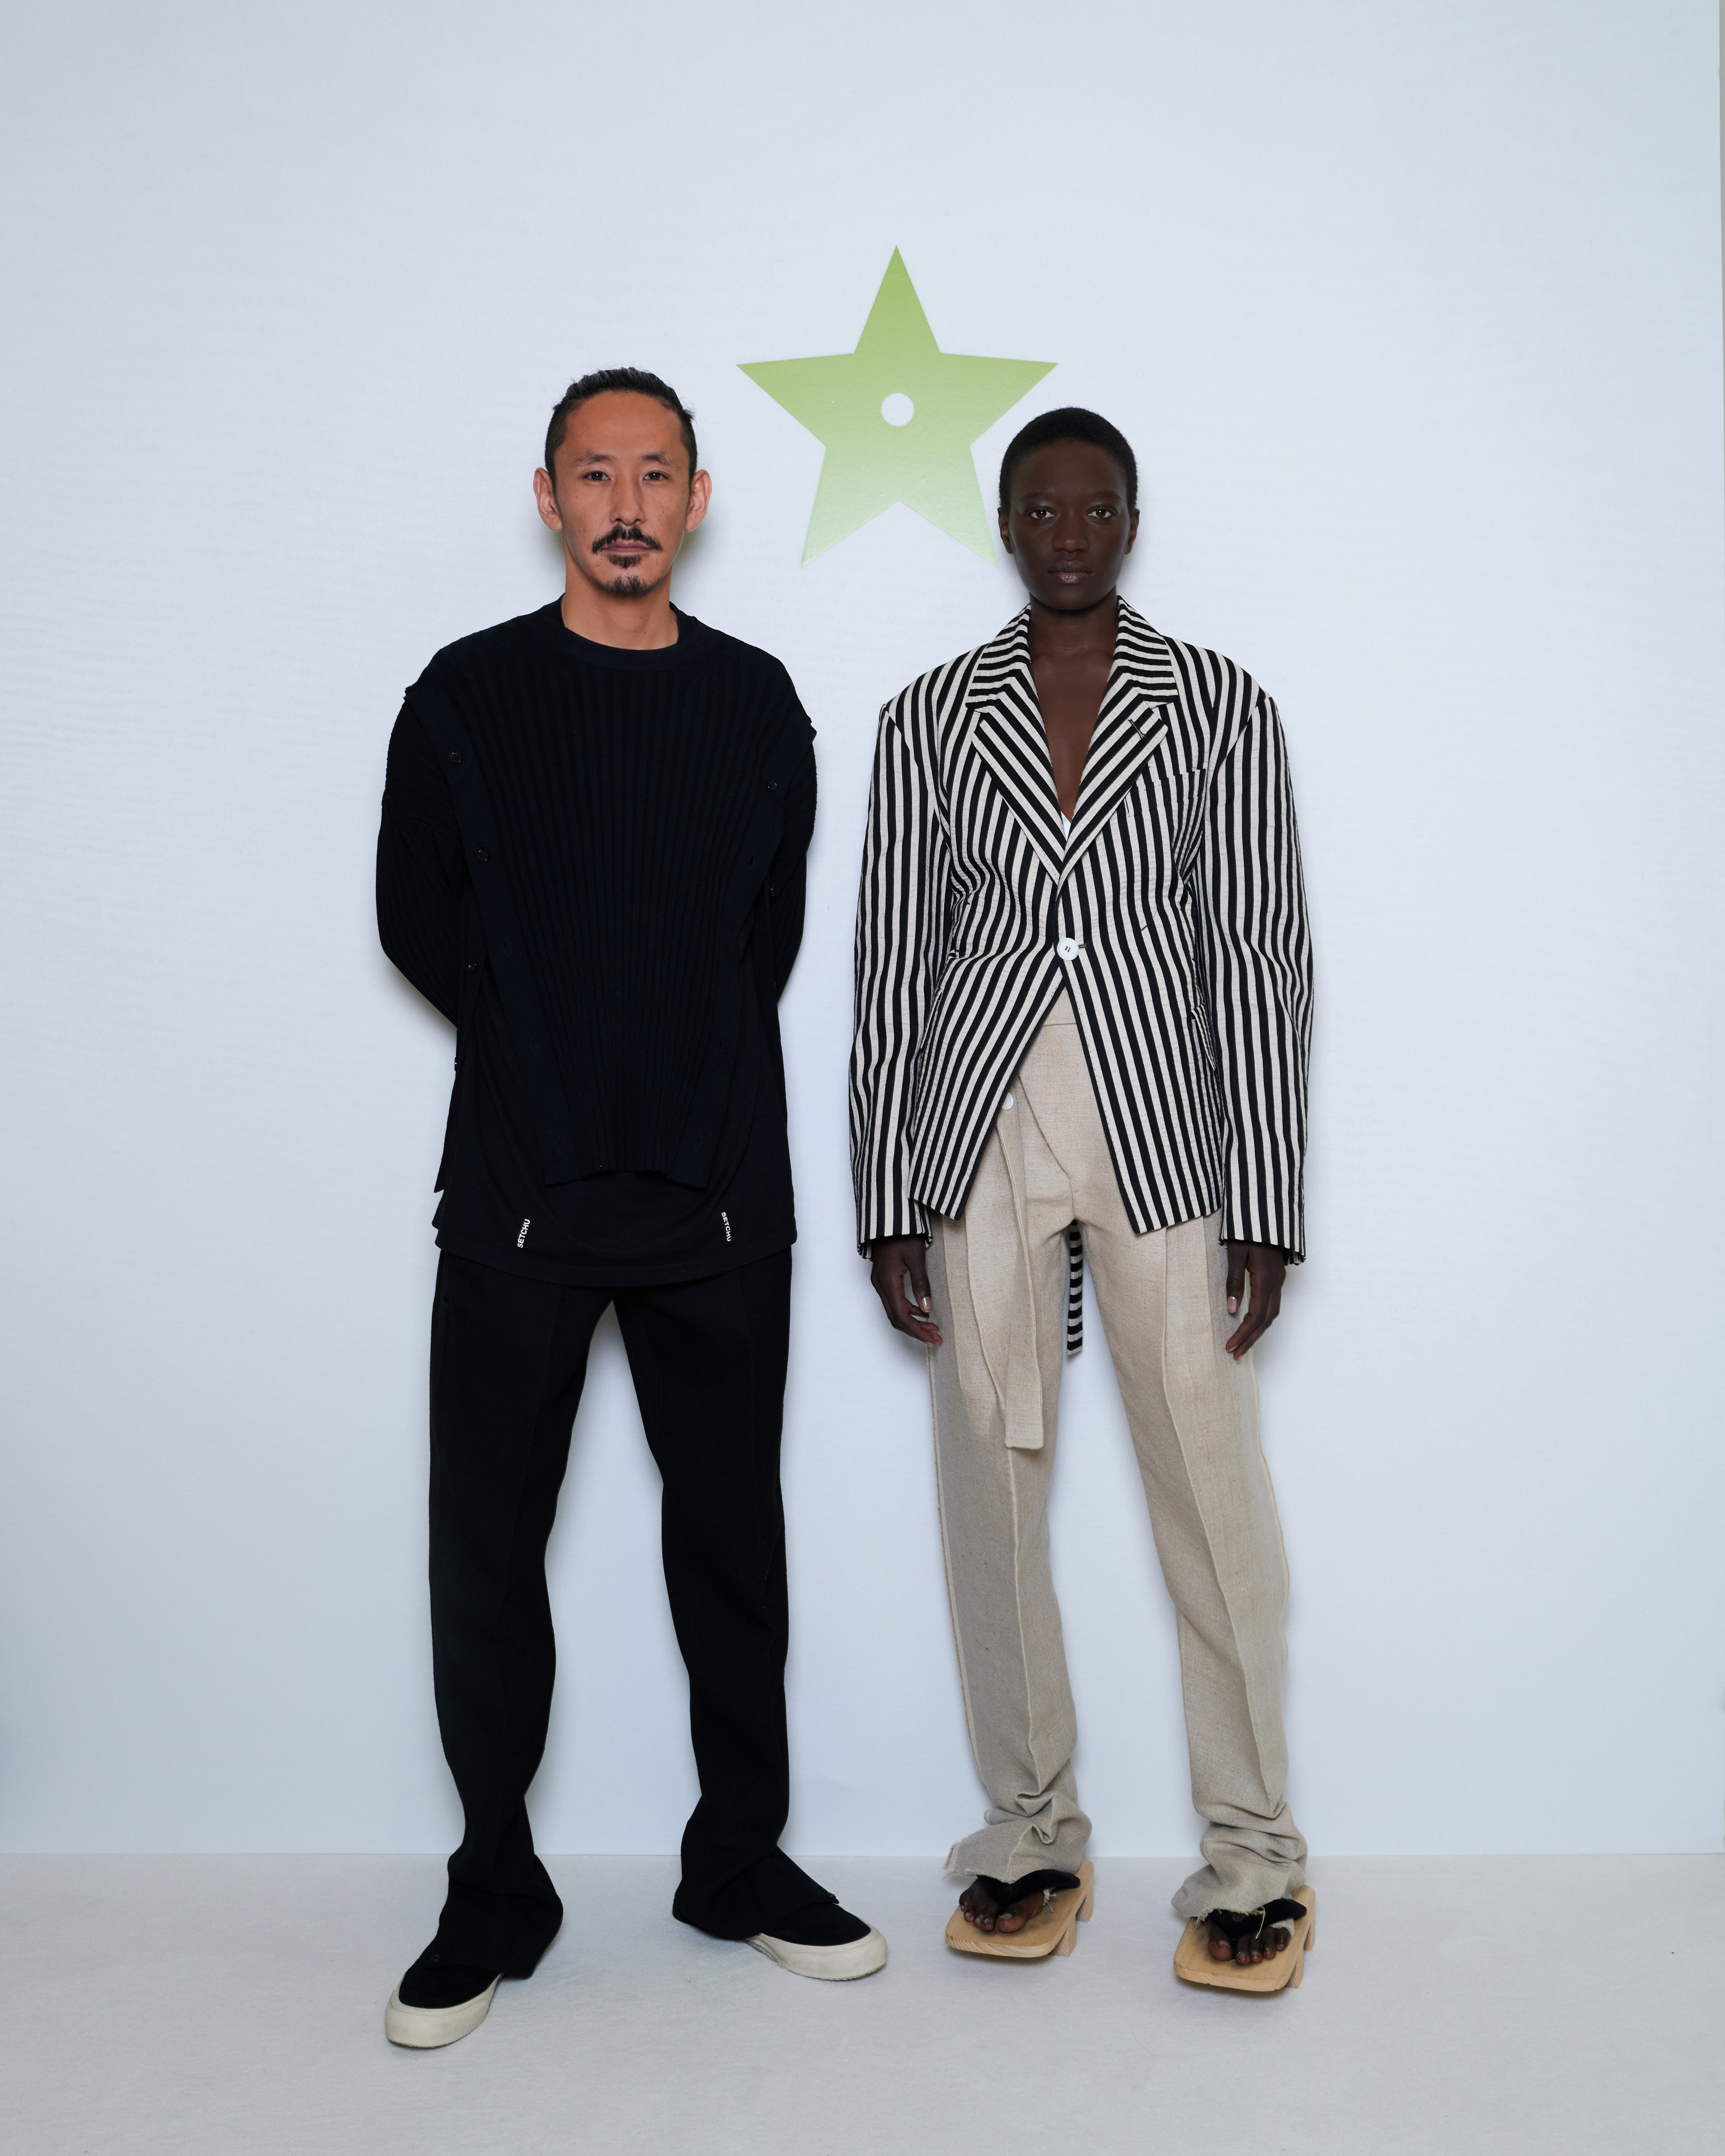 Satoshi Kuwata (left), the founder of Milan-based label Setchu, with a model at the LVMH Prize event in Paris, June 2023. He reveals why his favourite fashion capital is Milan and discusses his future plans after winning the 2023 LVMH Prize.